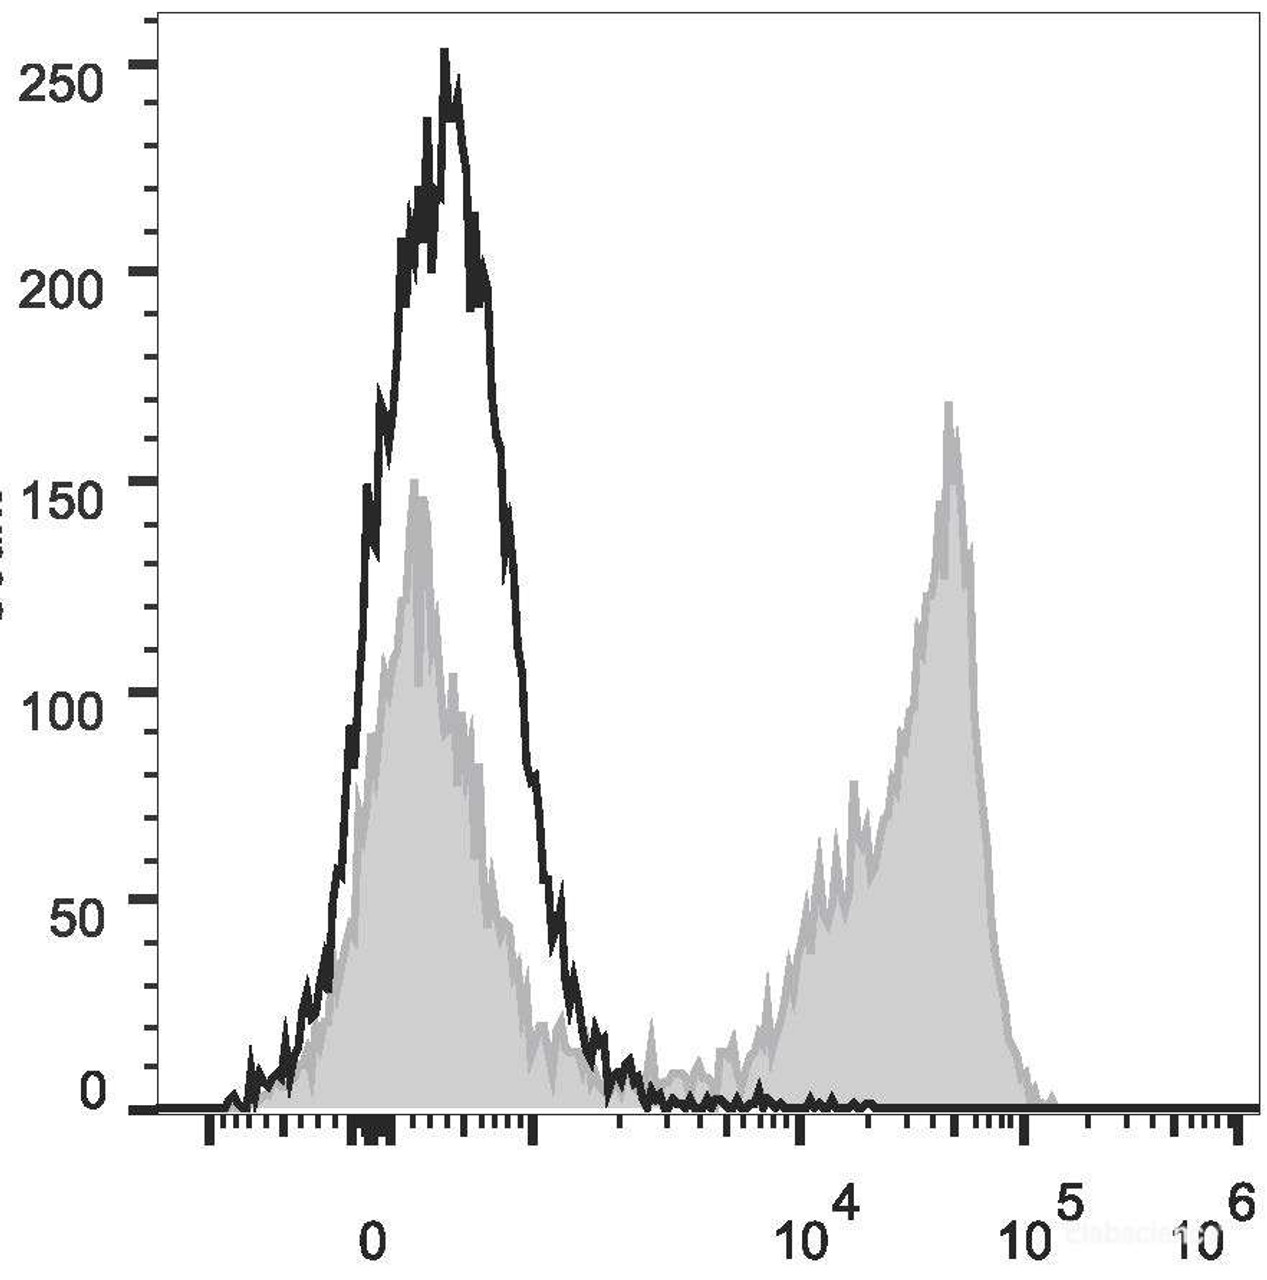 C57BL/6 murine bone marrow cells are stained with PercP Anti-Mouse Ly-6G/Ly-6C (Gr-1) Antibody[Used at .2 μg/1<sup>6</sup> cells dilution](filled gray histogram). Unstained bone marrow cells (empty black histogram) are used as control.